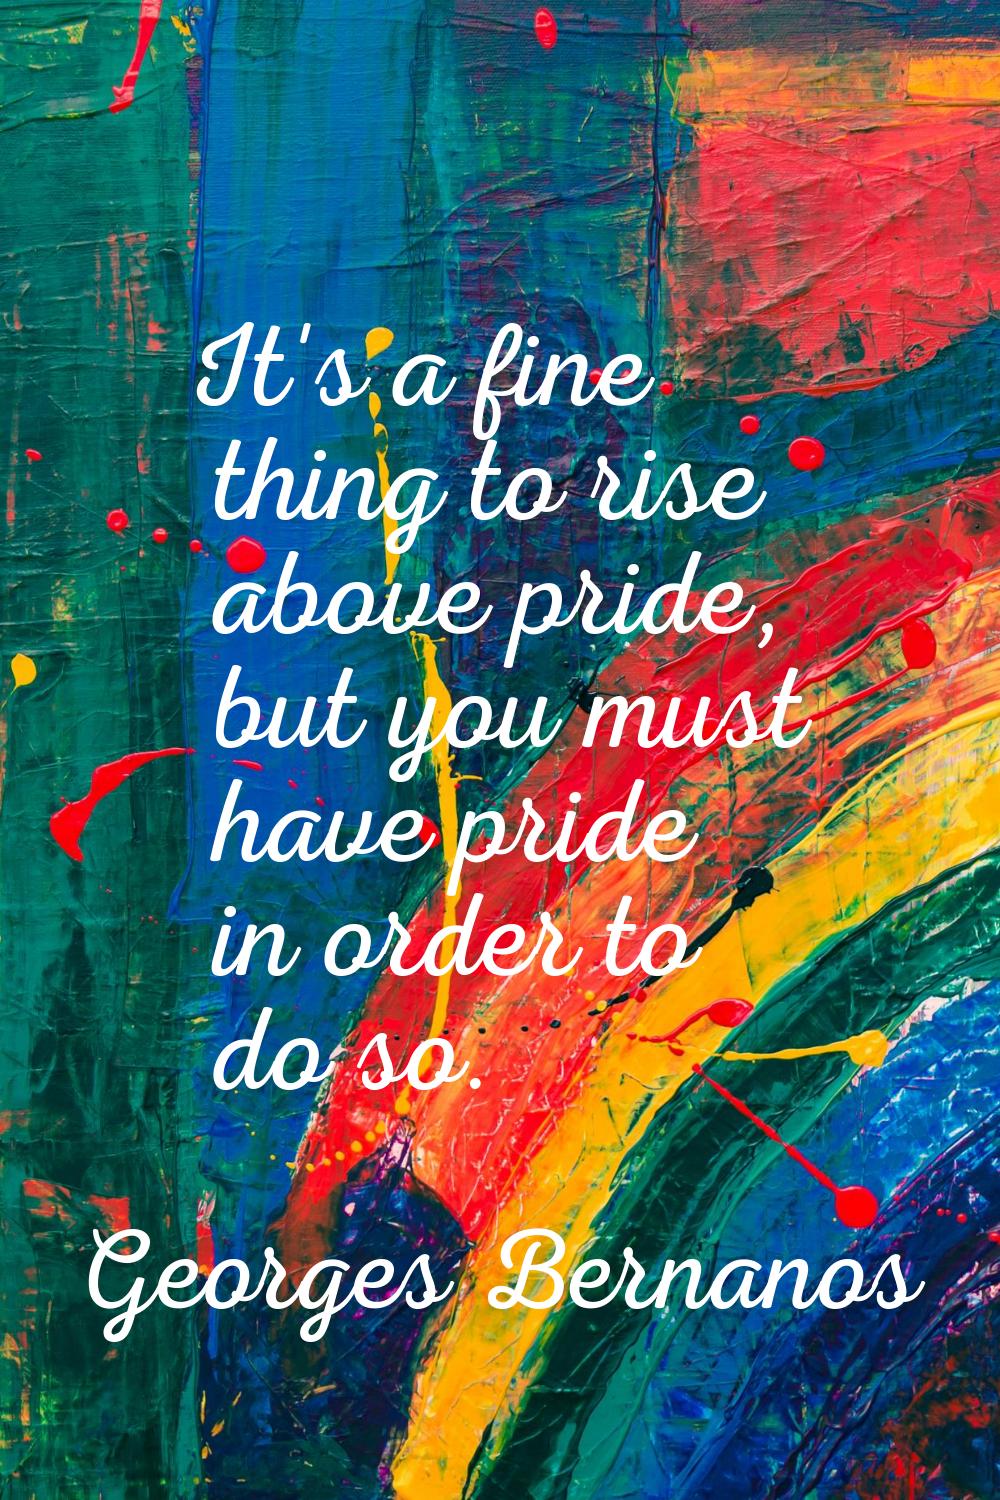 It's a fine thing to rise above pride, but you must have pride in order to do so.